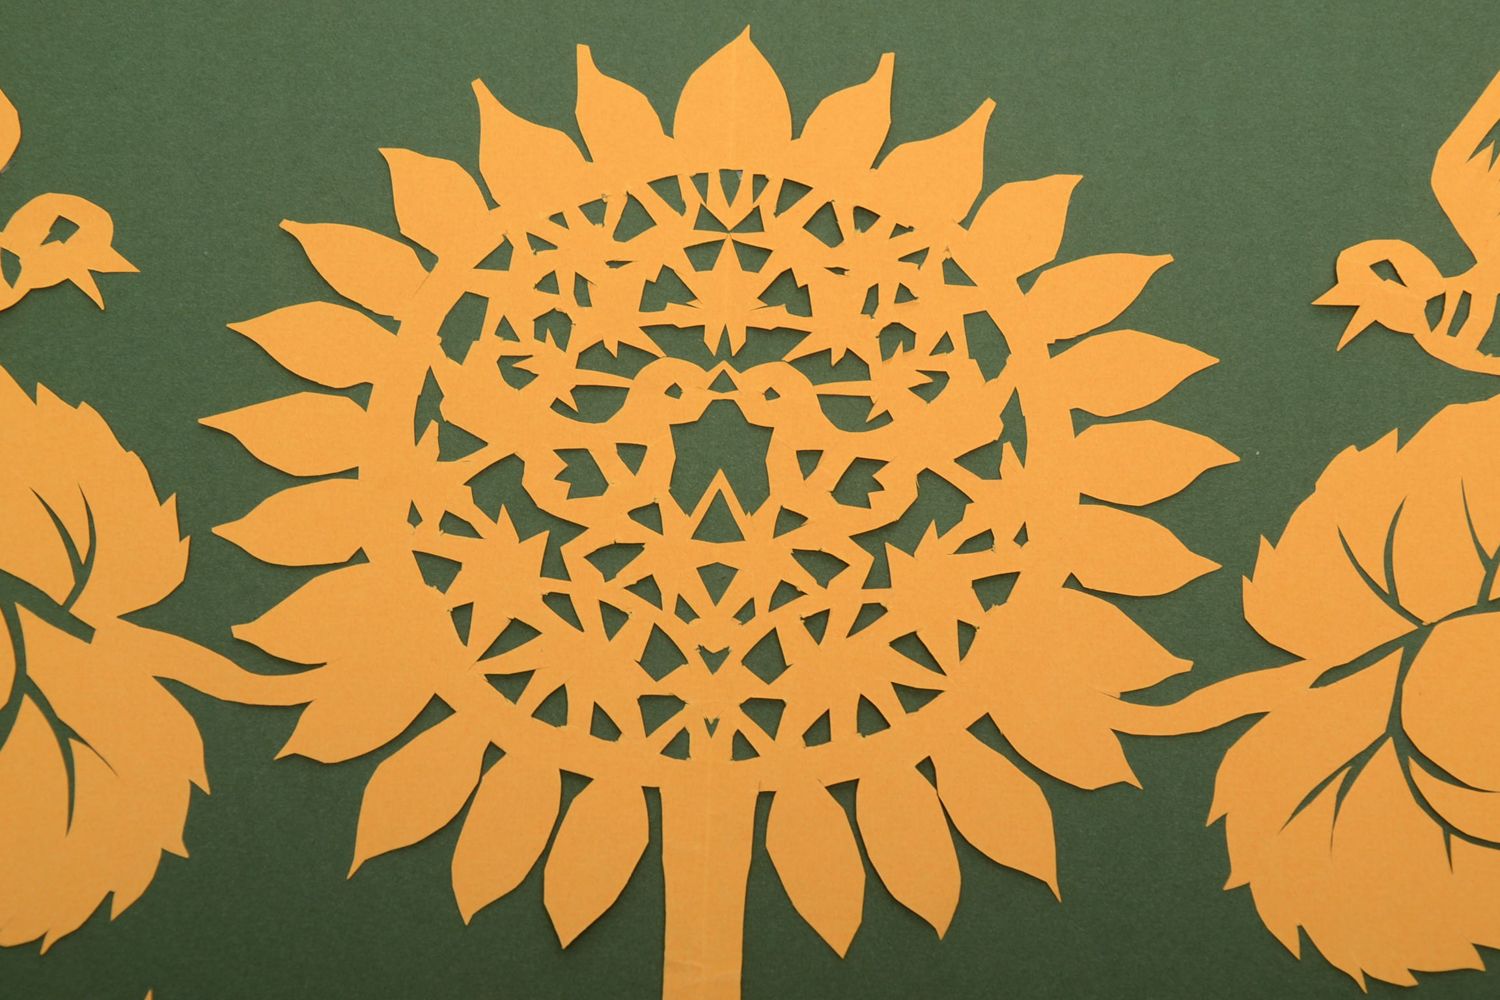 Paper cut out picture vitinanka on green background Tree of Life photo 4